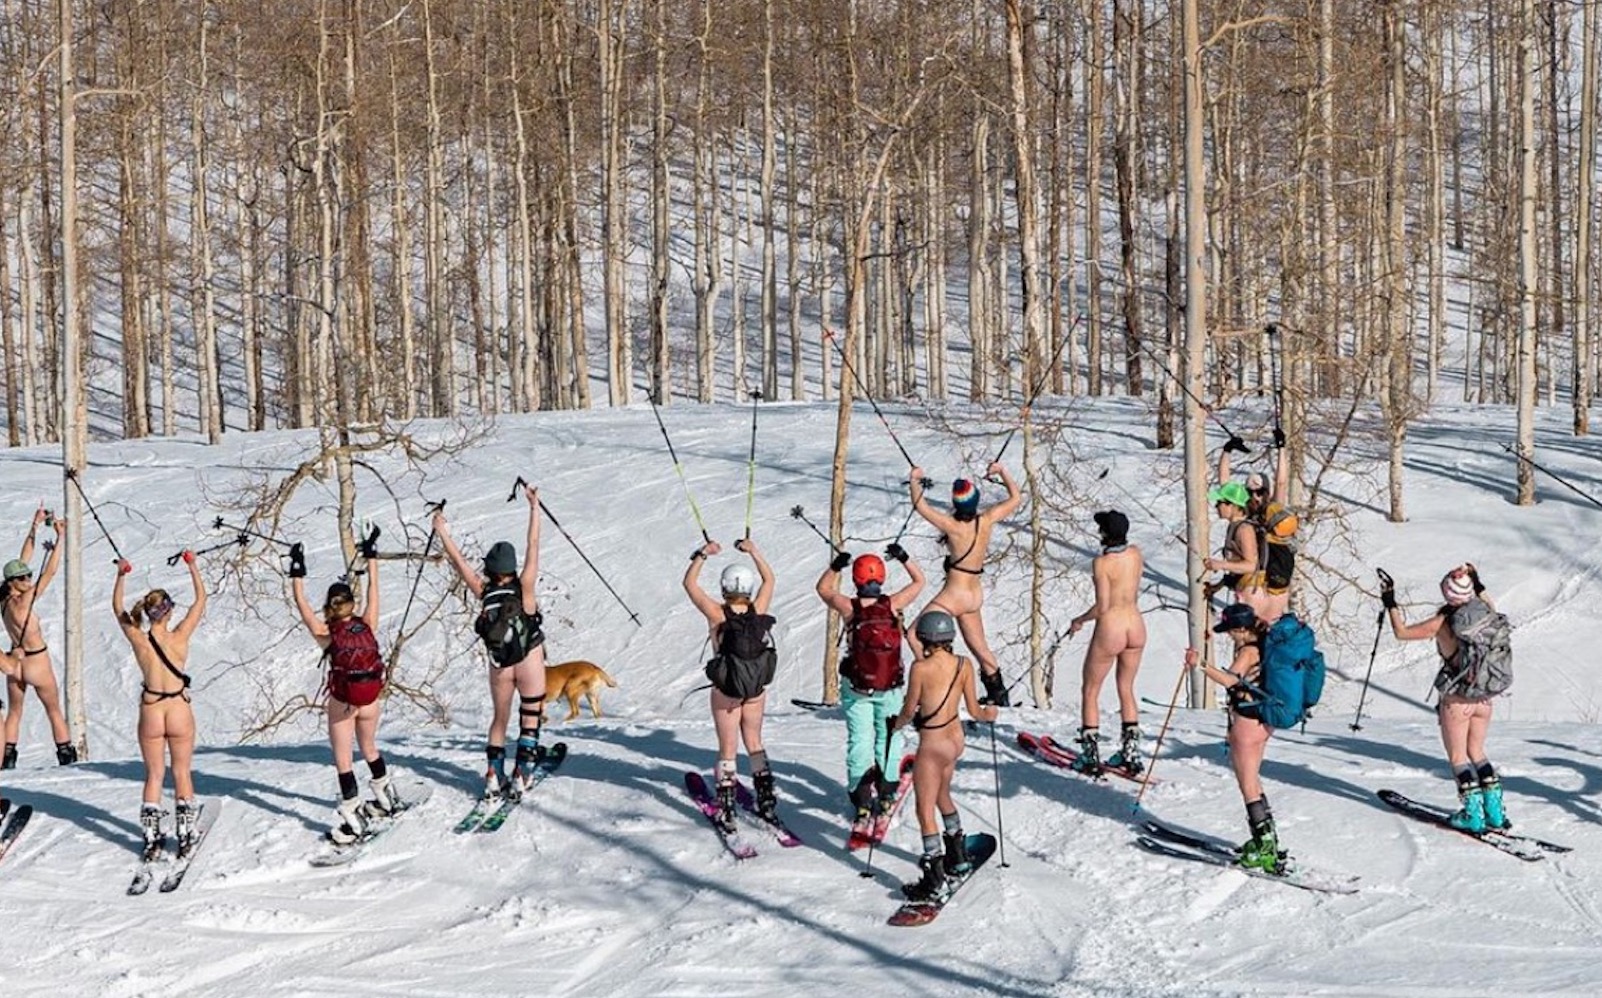 All Female Nude Backcountry Ski Event Finds New Home In Colorado